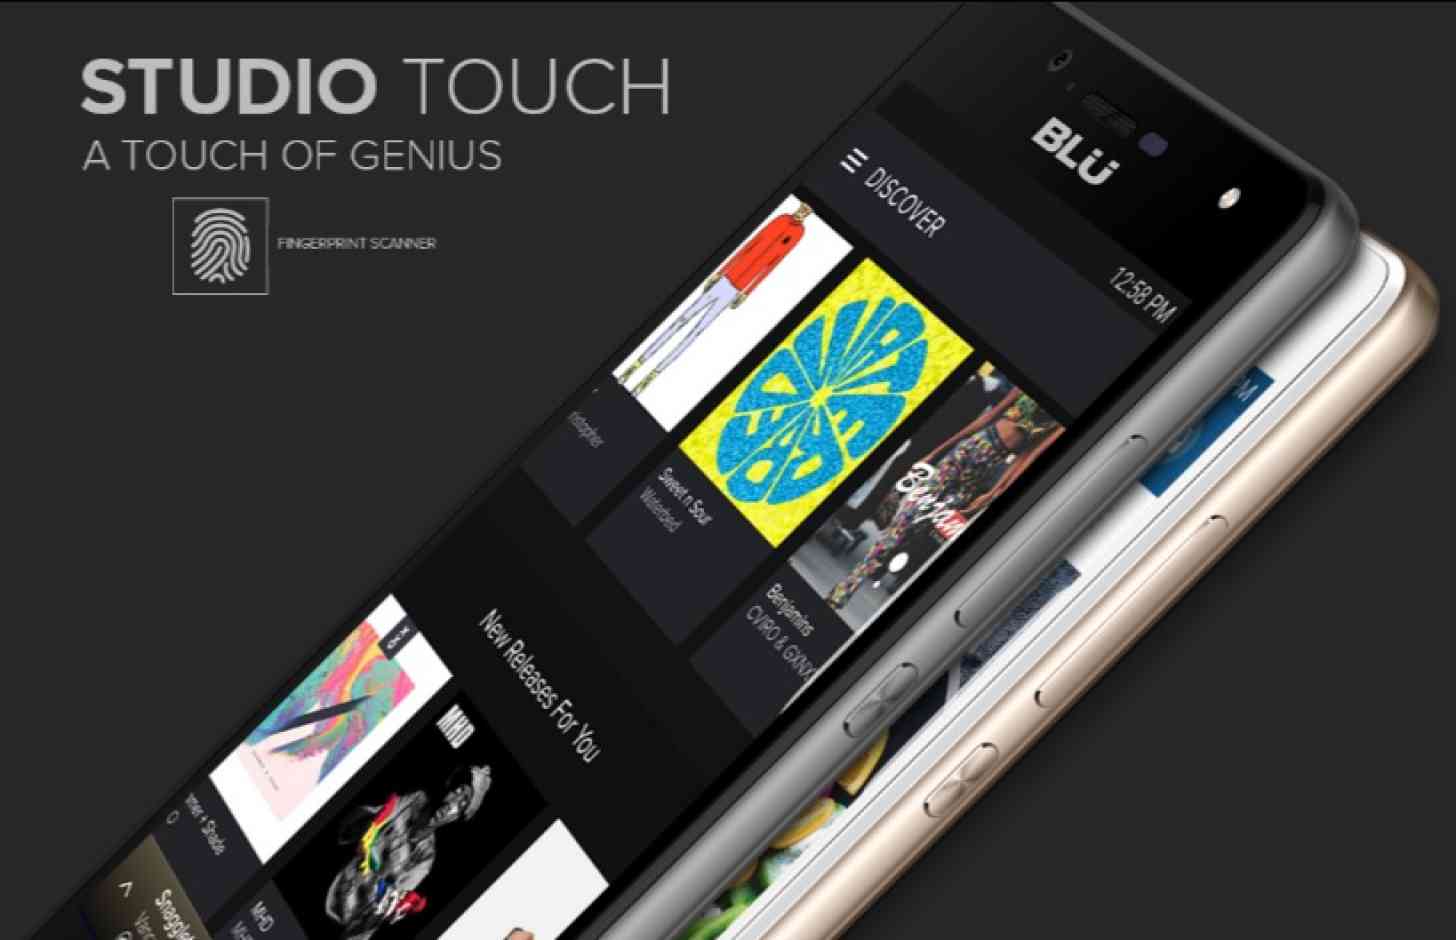 BLU's Studio Touch smartphone comes with fingerprint sensor for only $100